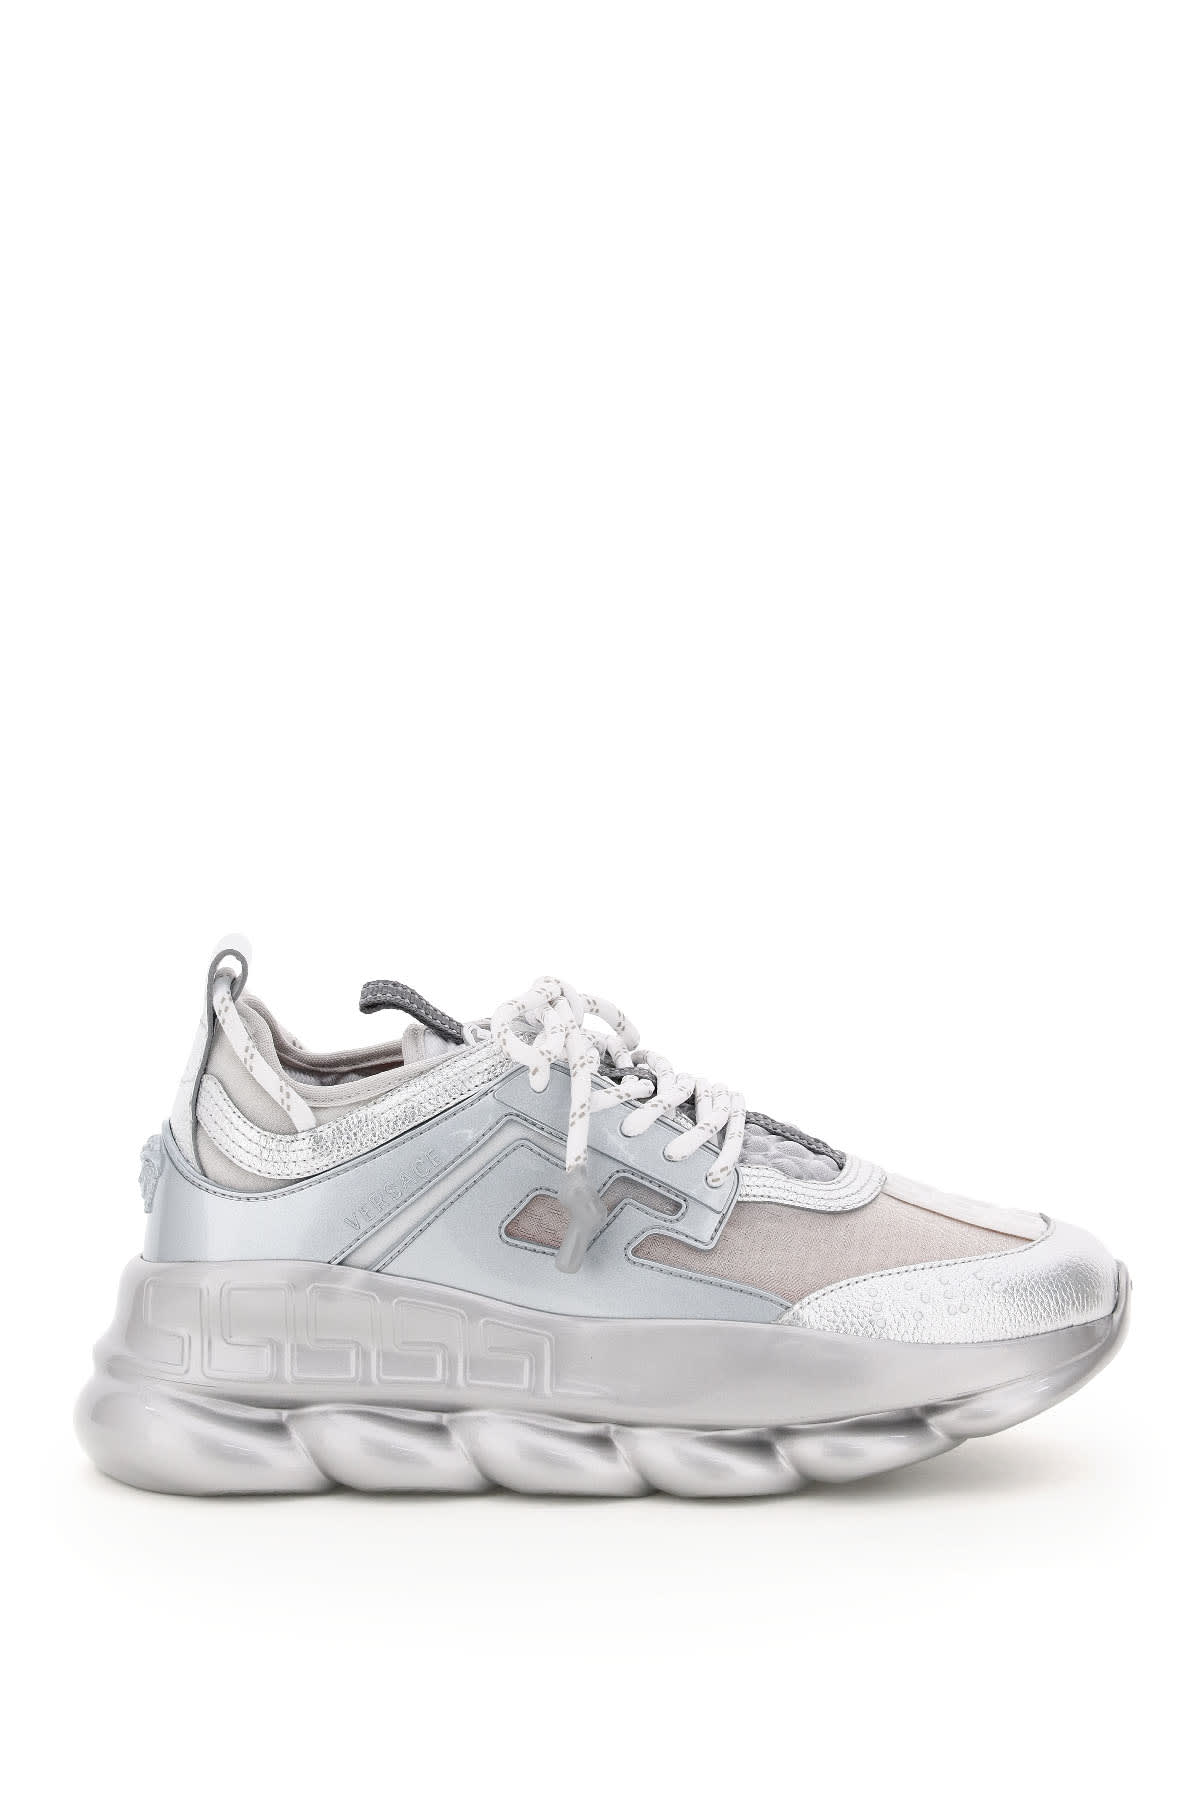 Versace Silver Chain Reaction Sneakers